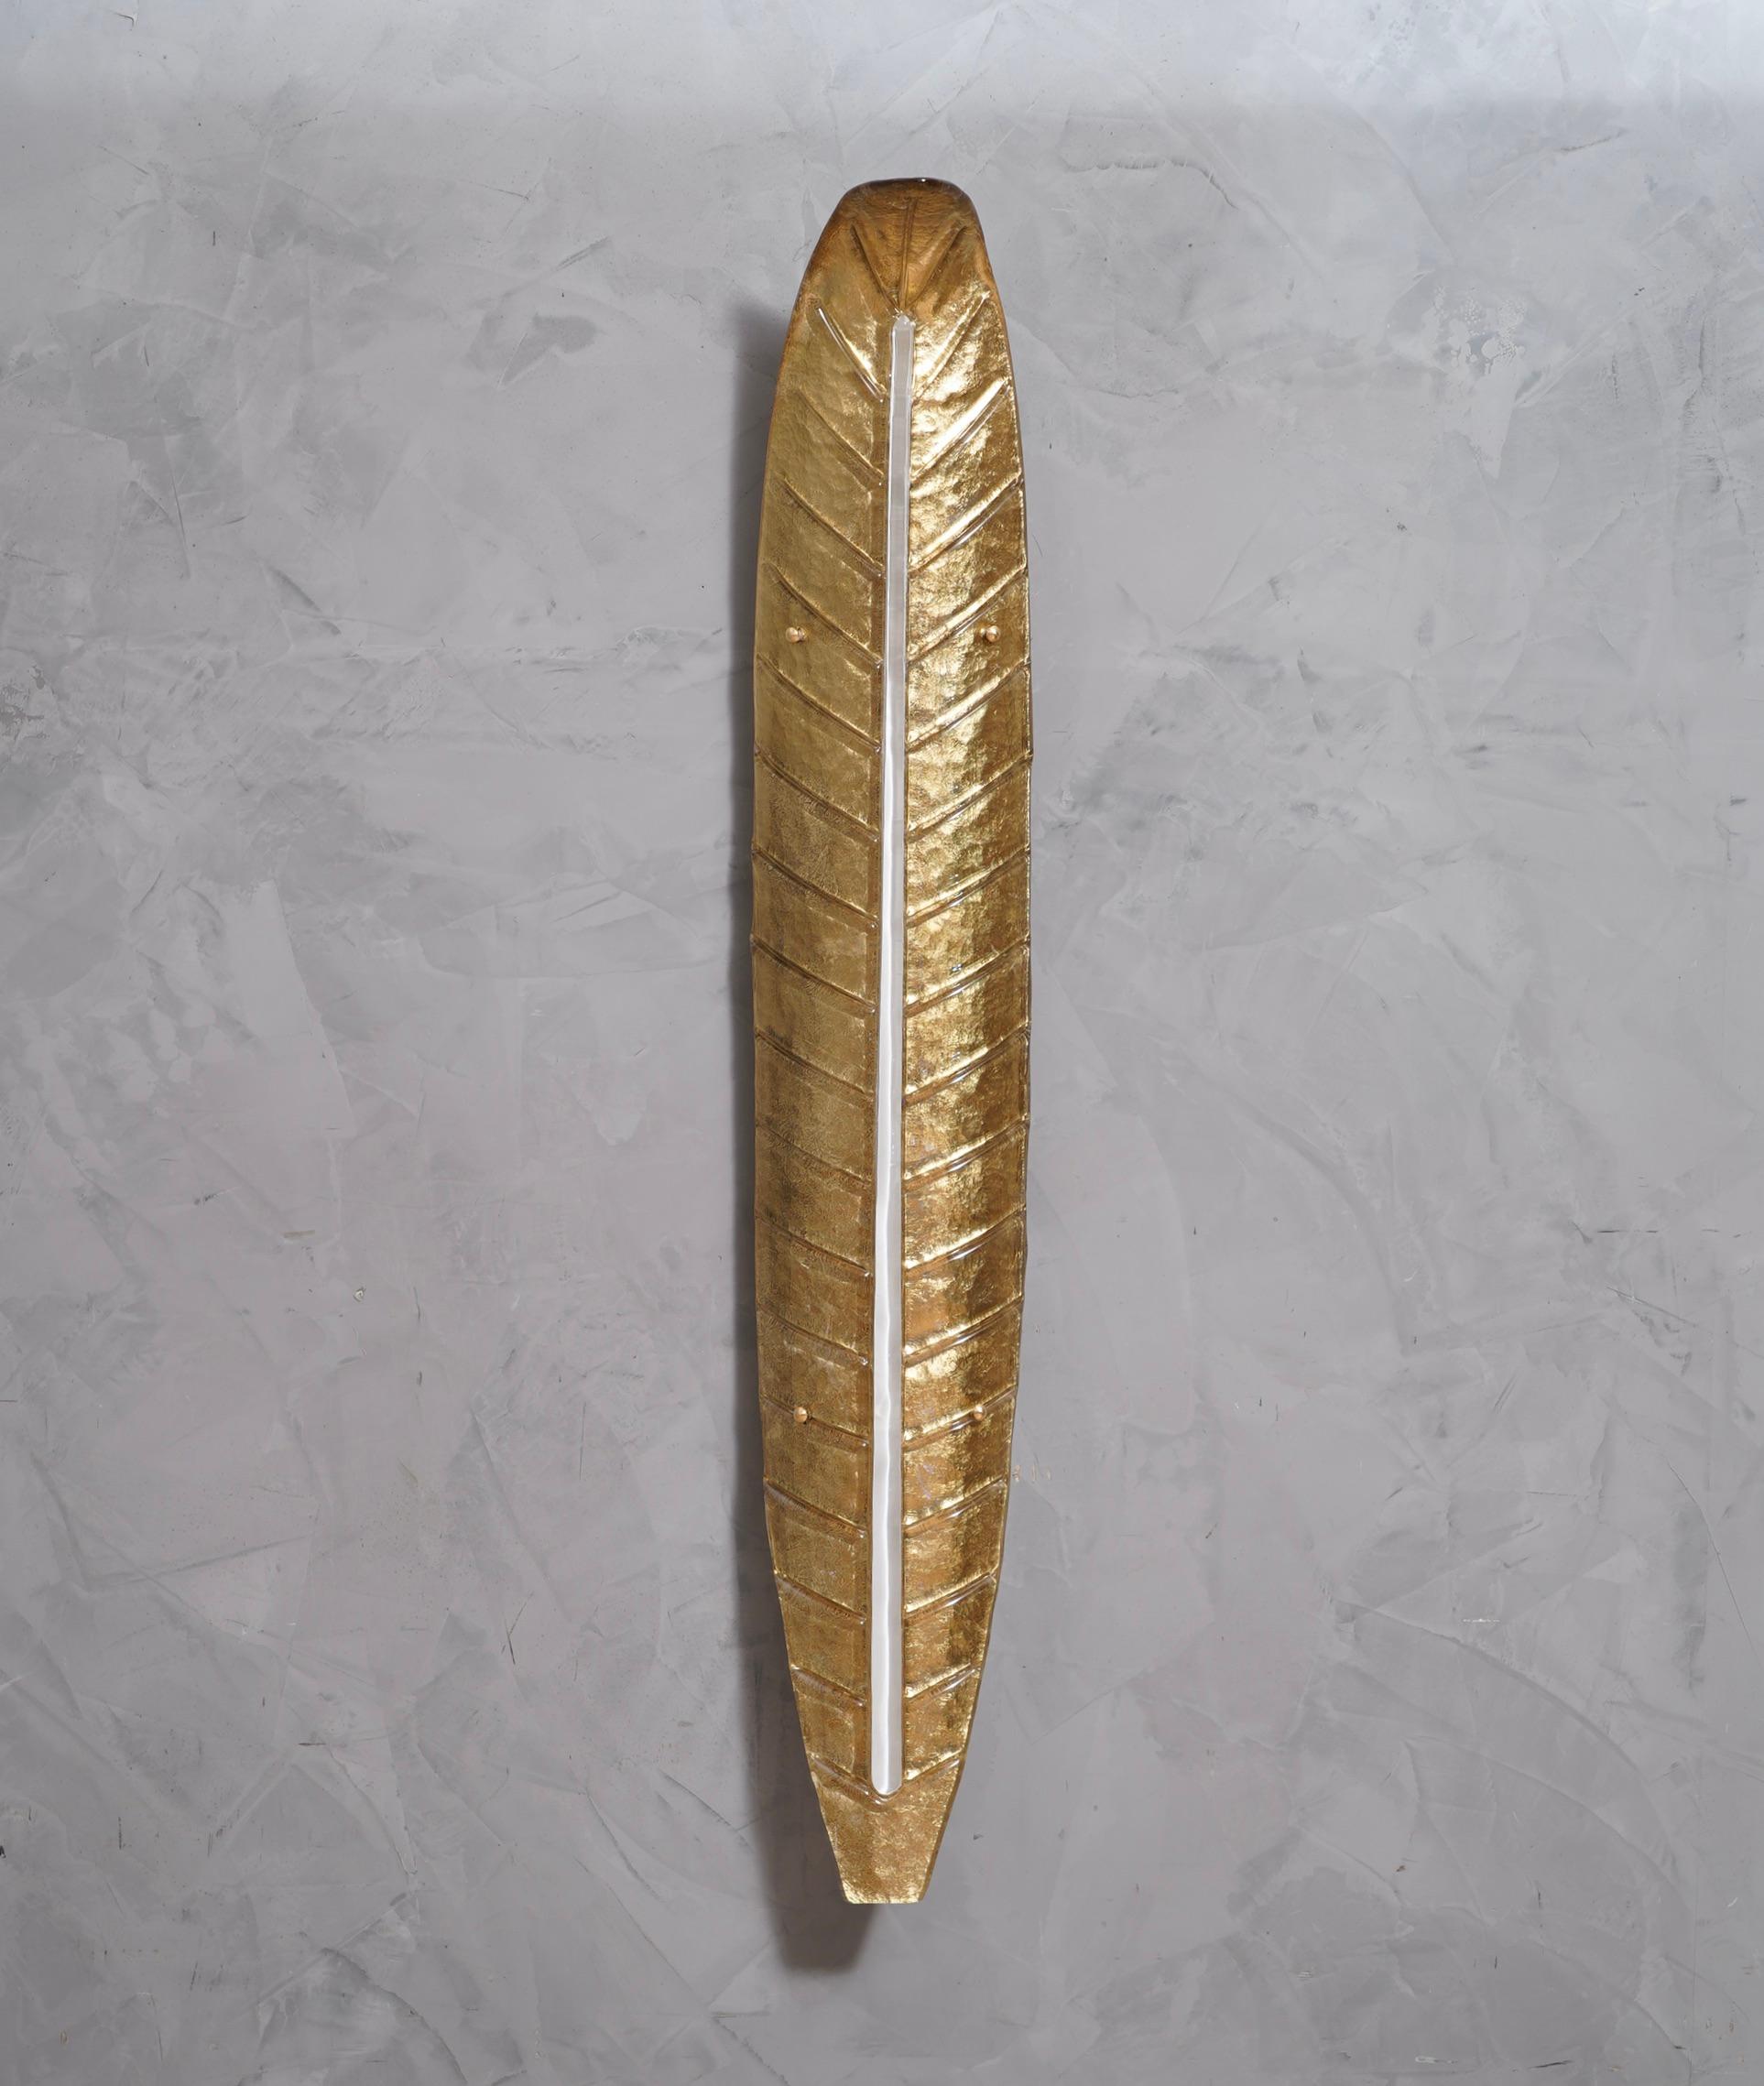 Beautiful design for this leaf-shaped applique, all gold with a vertical white rib. Refinement and class as in the Murano style, one-of-a-kind pieces that always remain precious.

The applique is made up of a single piece of Murano glass, almost as